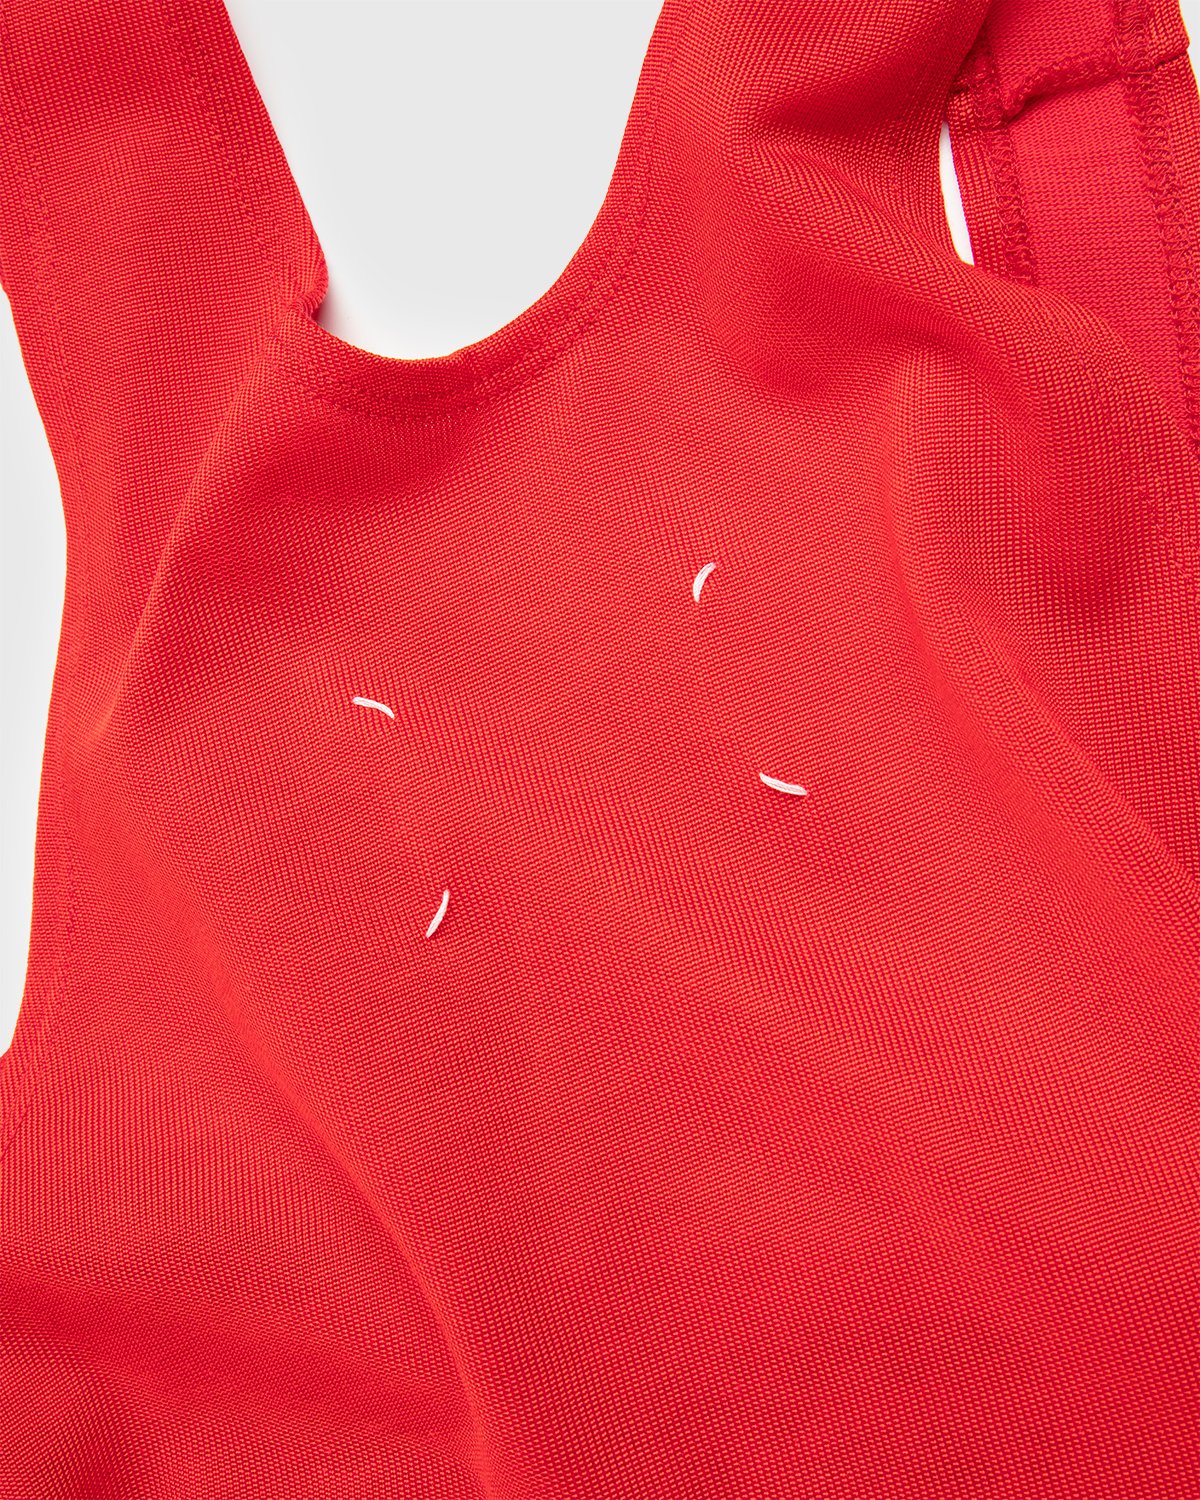 Maison Margiela - Tank Top Red - Clothing - Red - Image 4